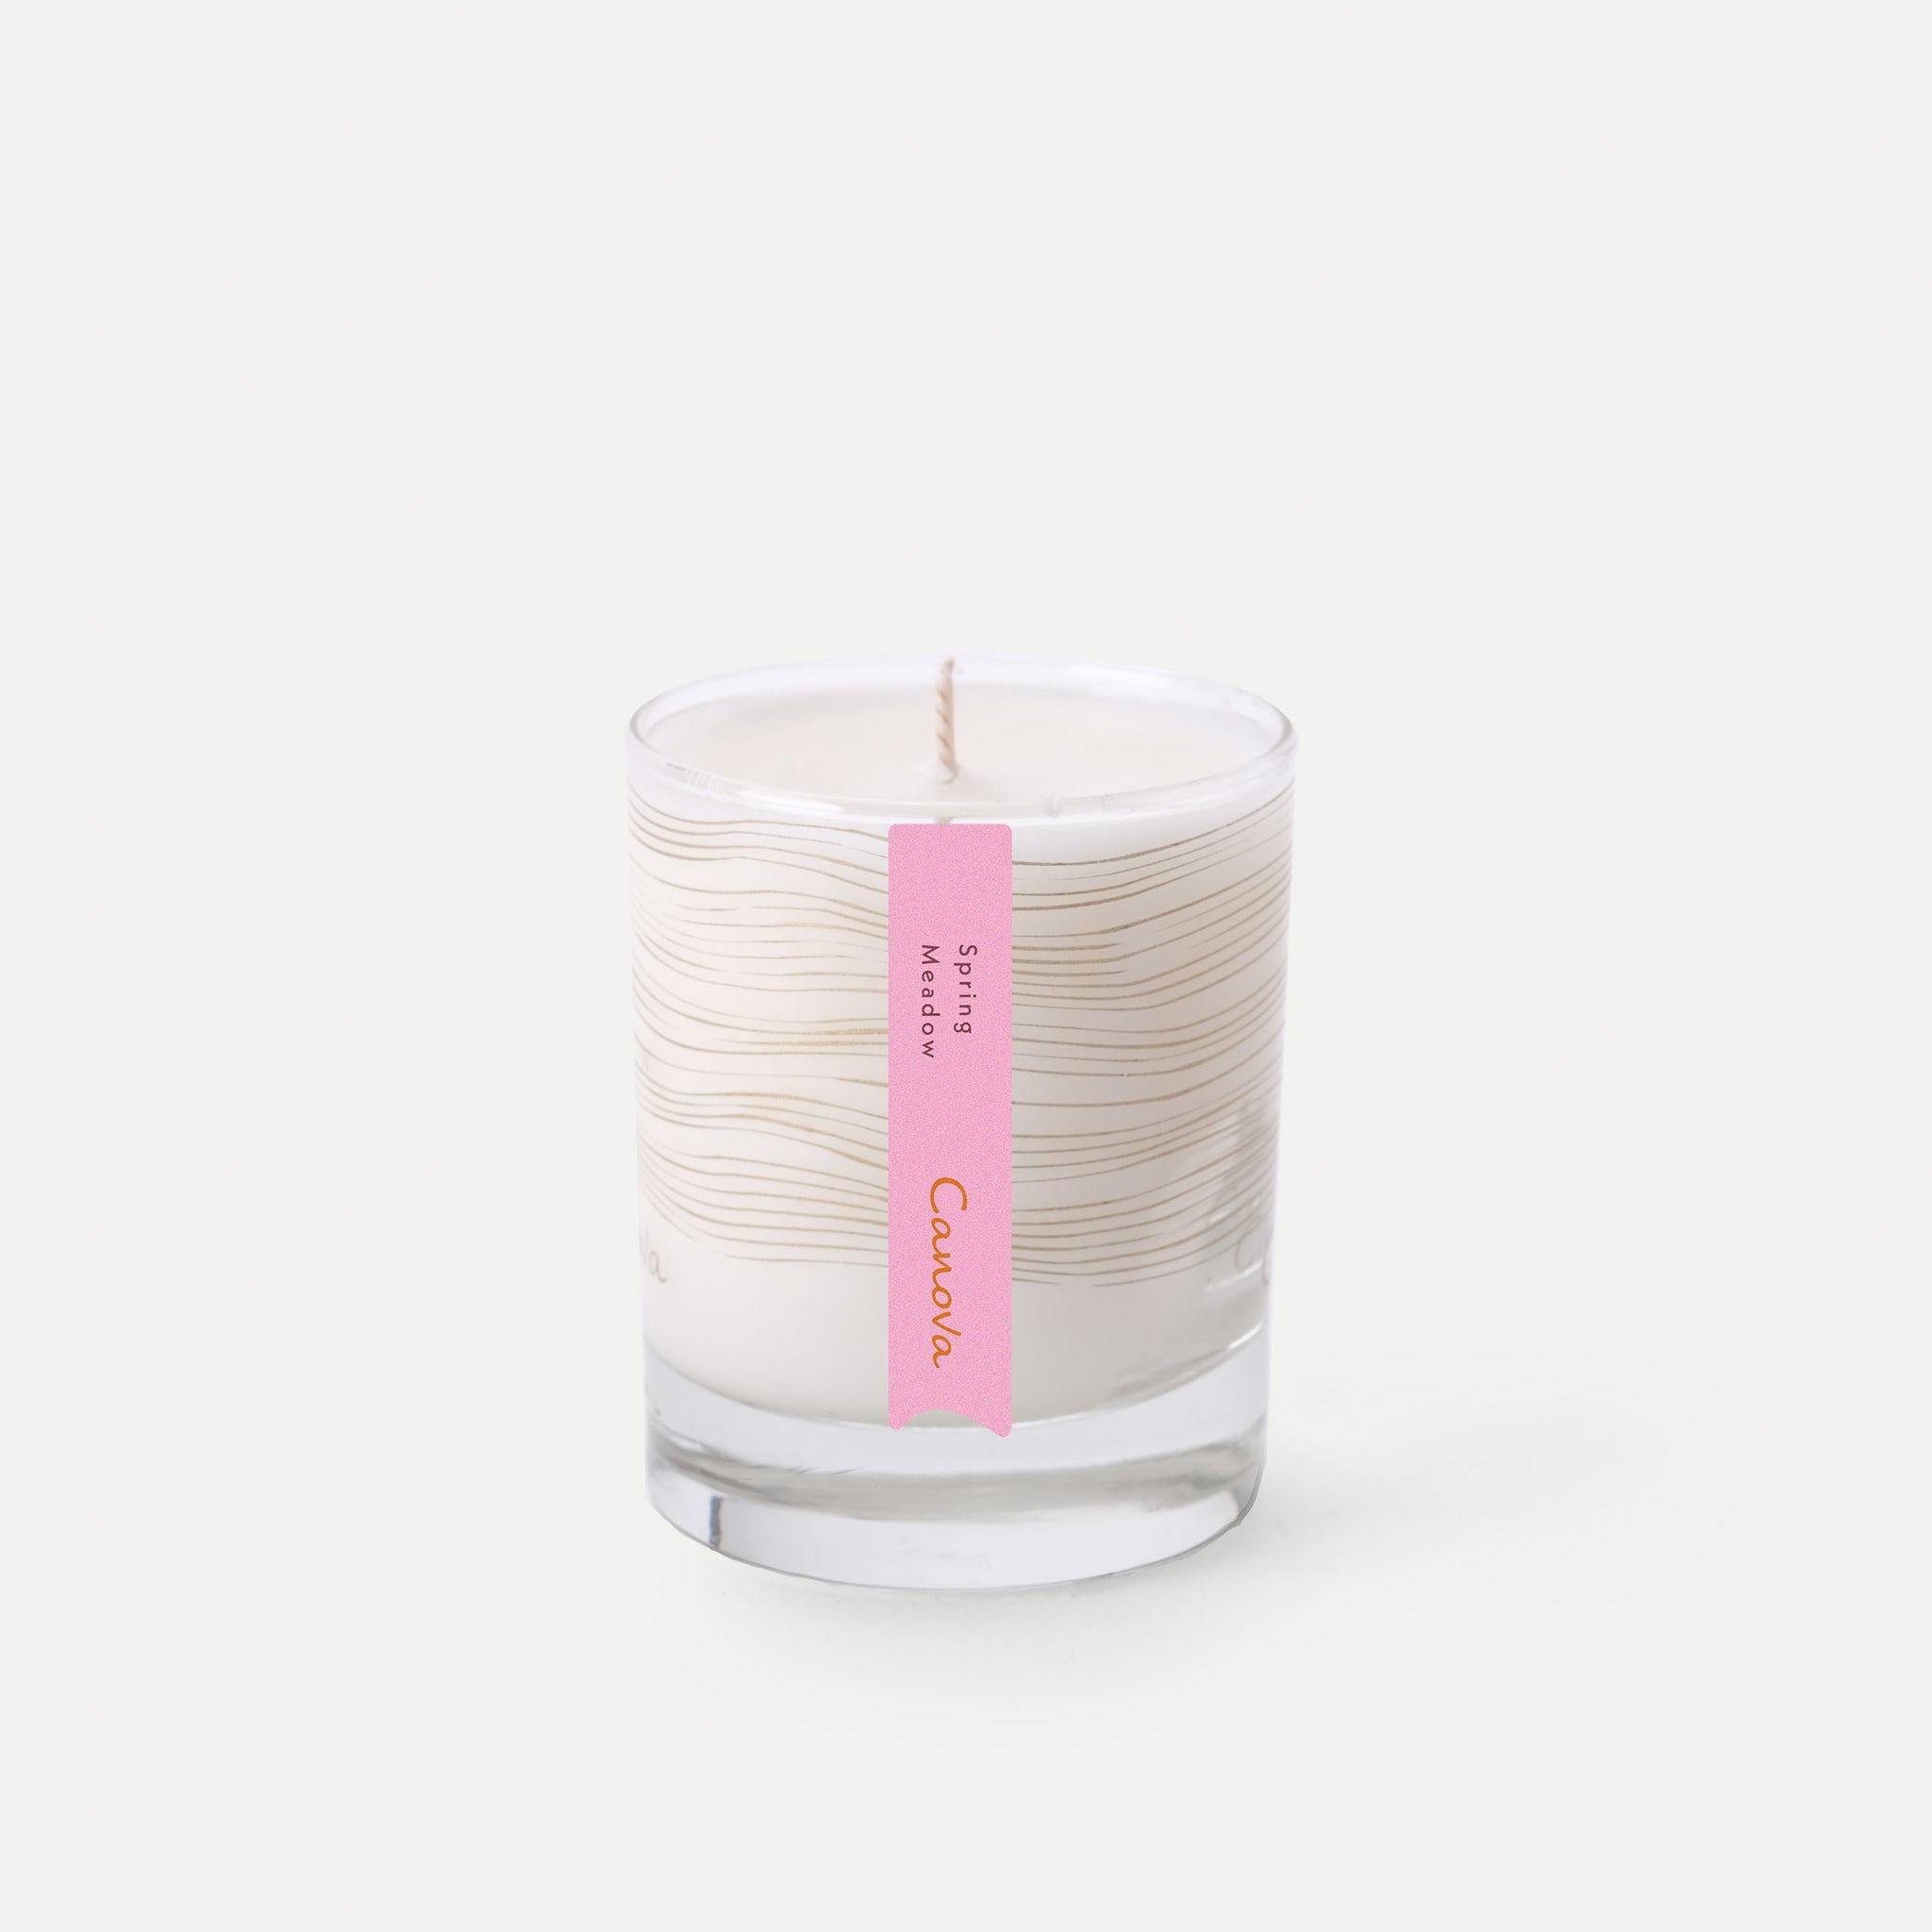 170g Signature - Spring Meadow Candle